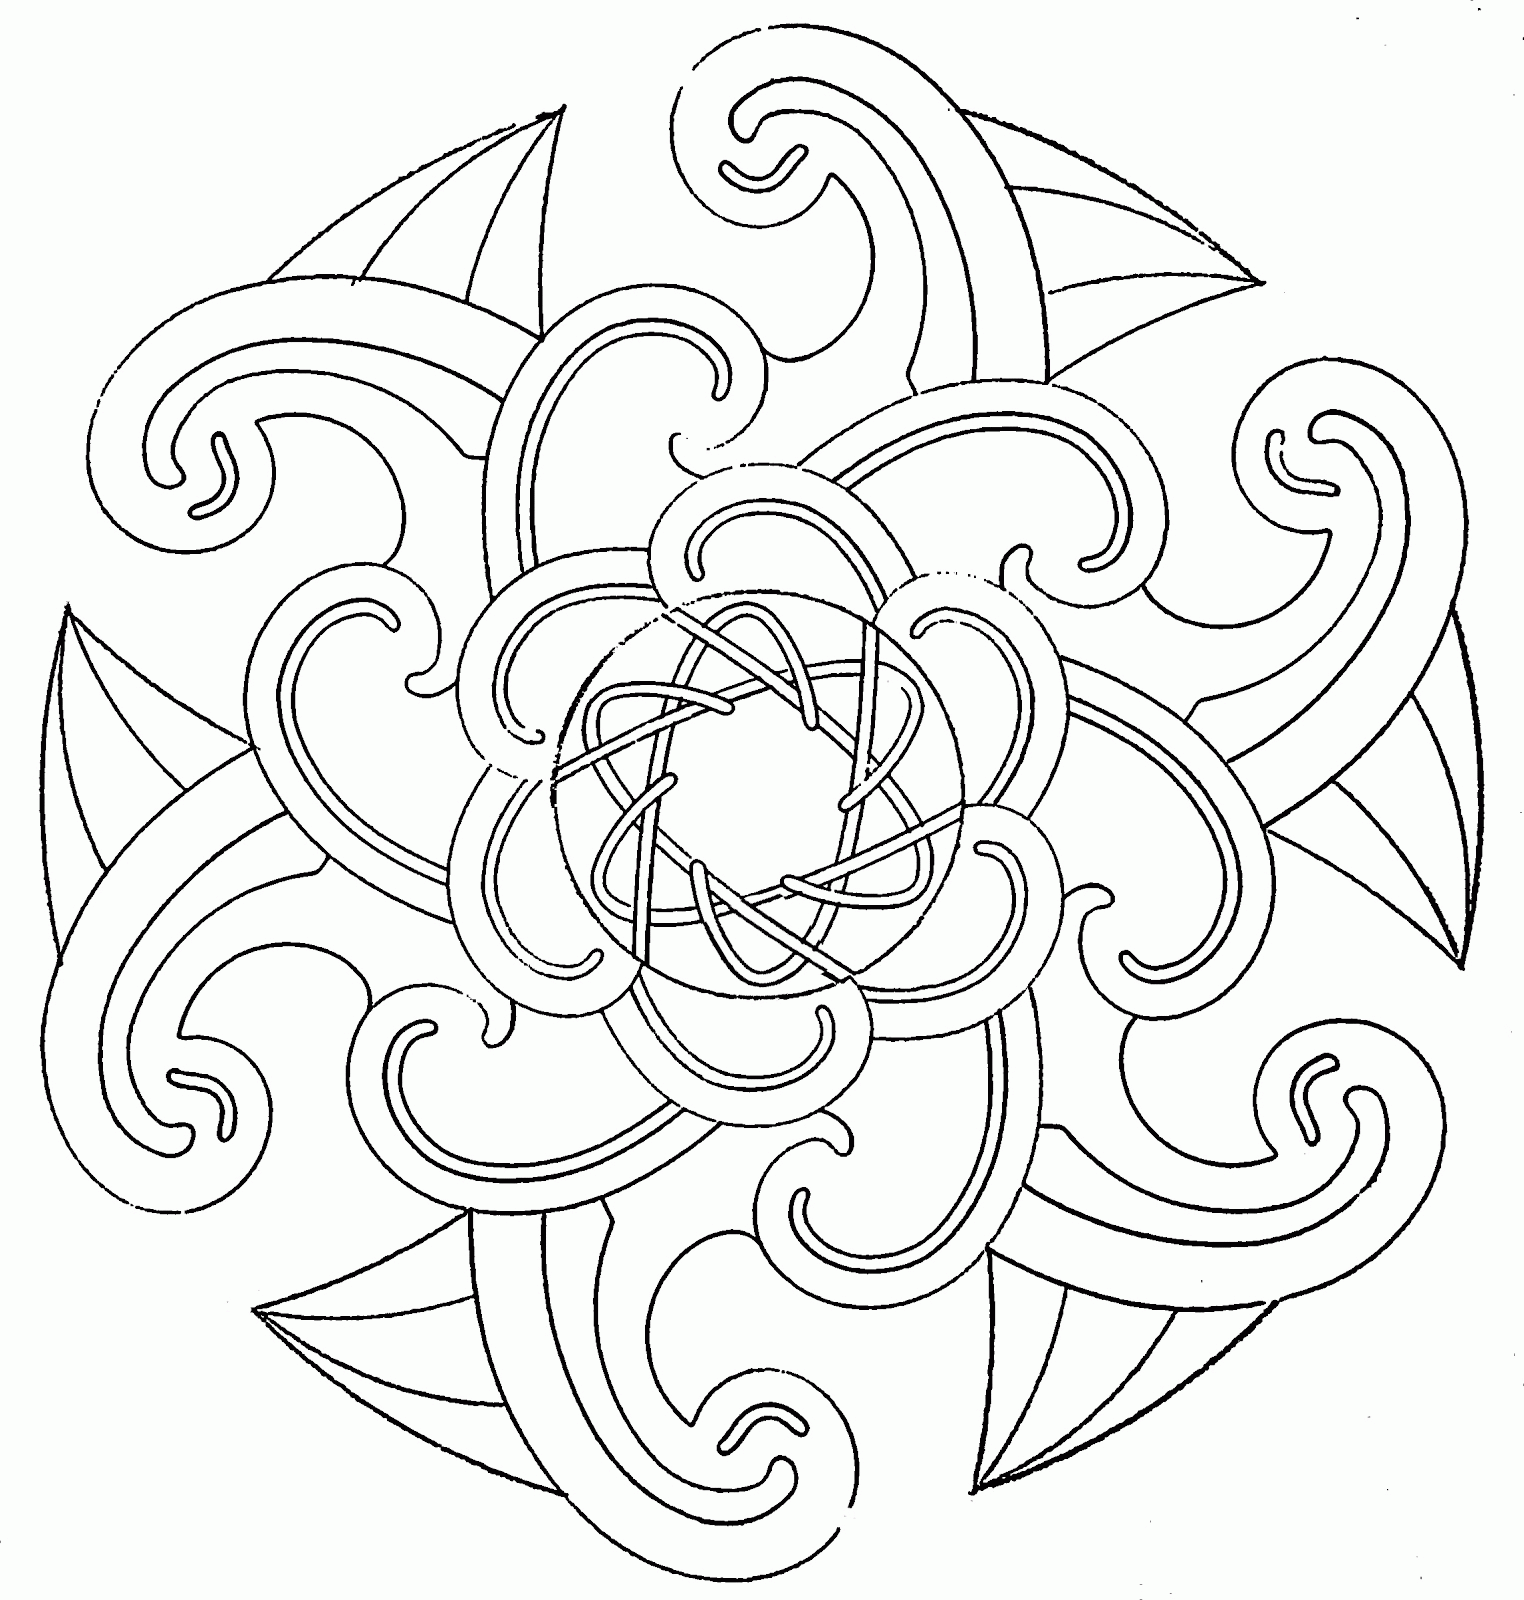 fun designs to color coloring pages of cool designs coloring home designs color fun to 